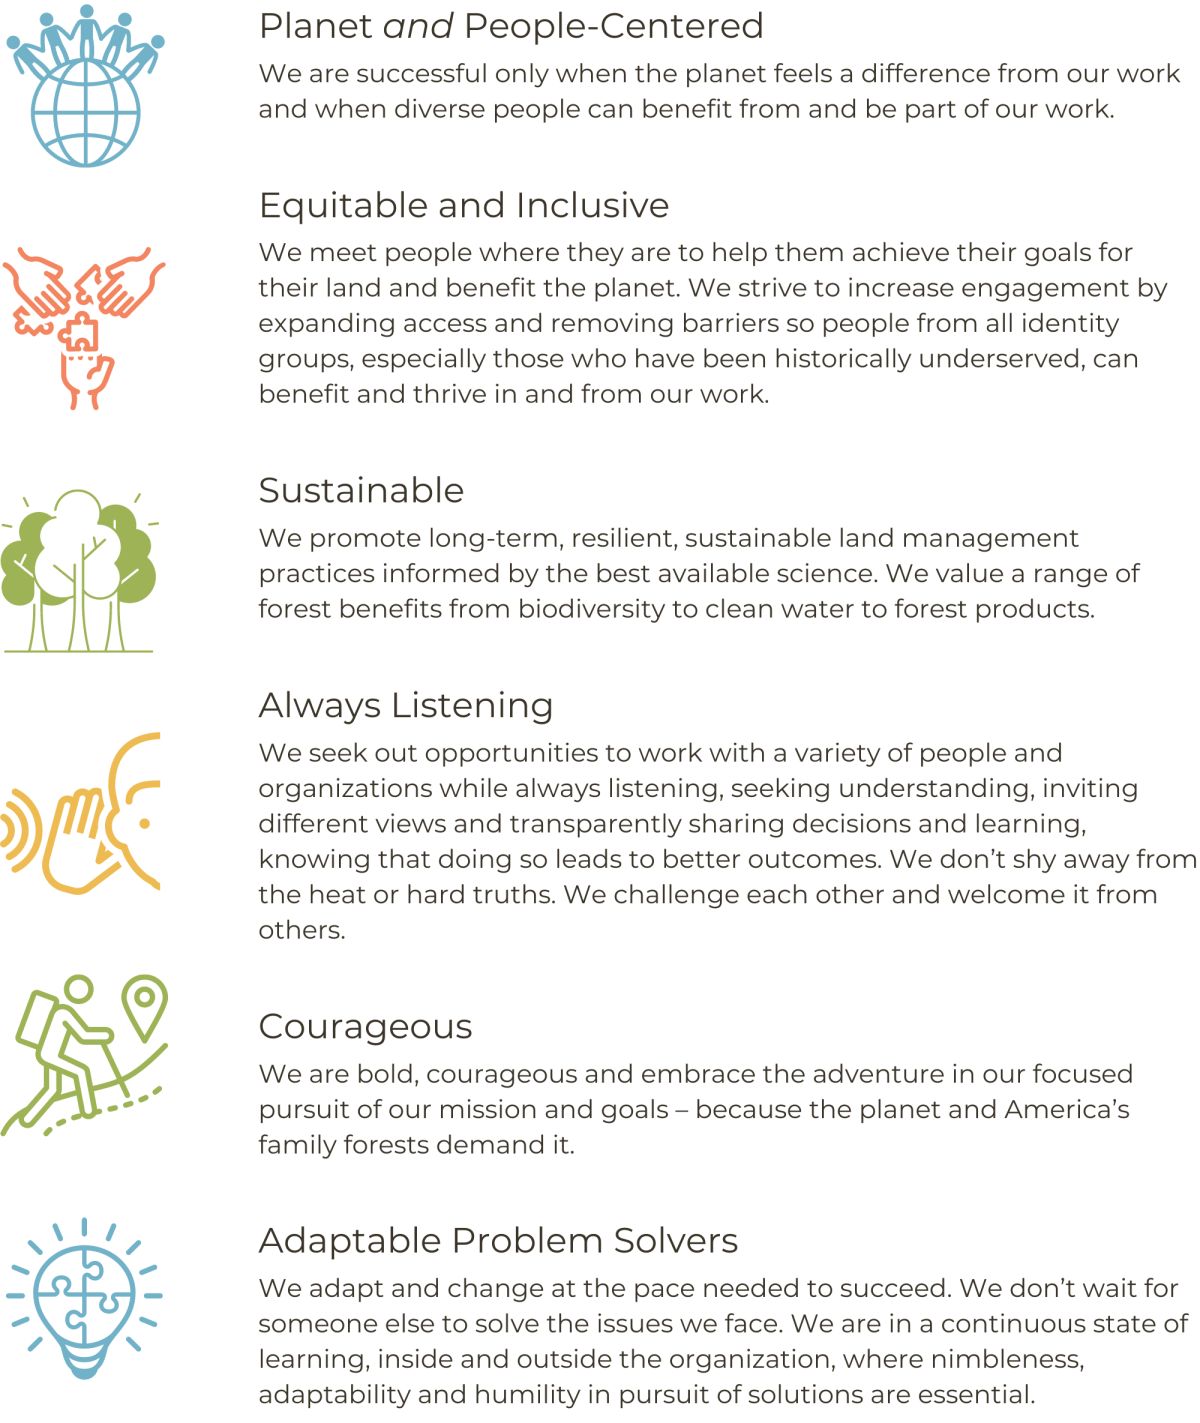 Icons with corresponding text that reads, "People and Planet-Centered; Equitable and Inclusive; Sustainable; Always Listening; Courageous; Adaptable Problem Solvers."